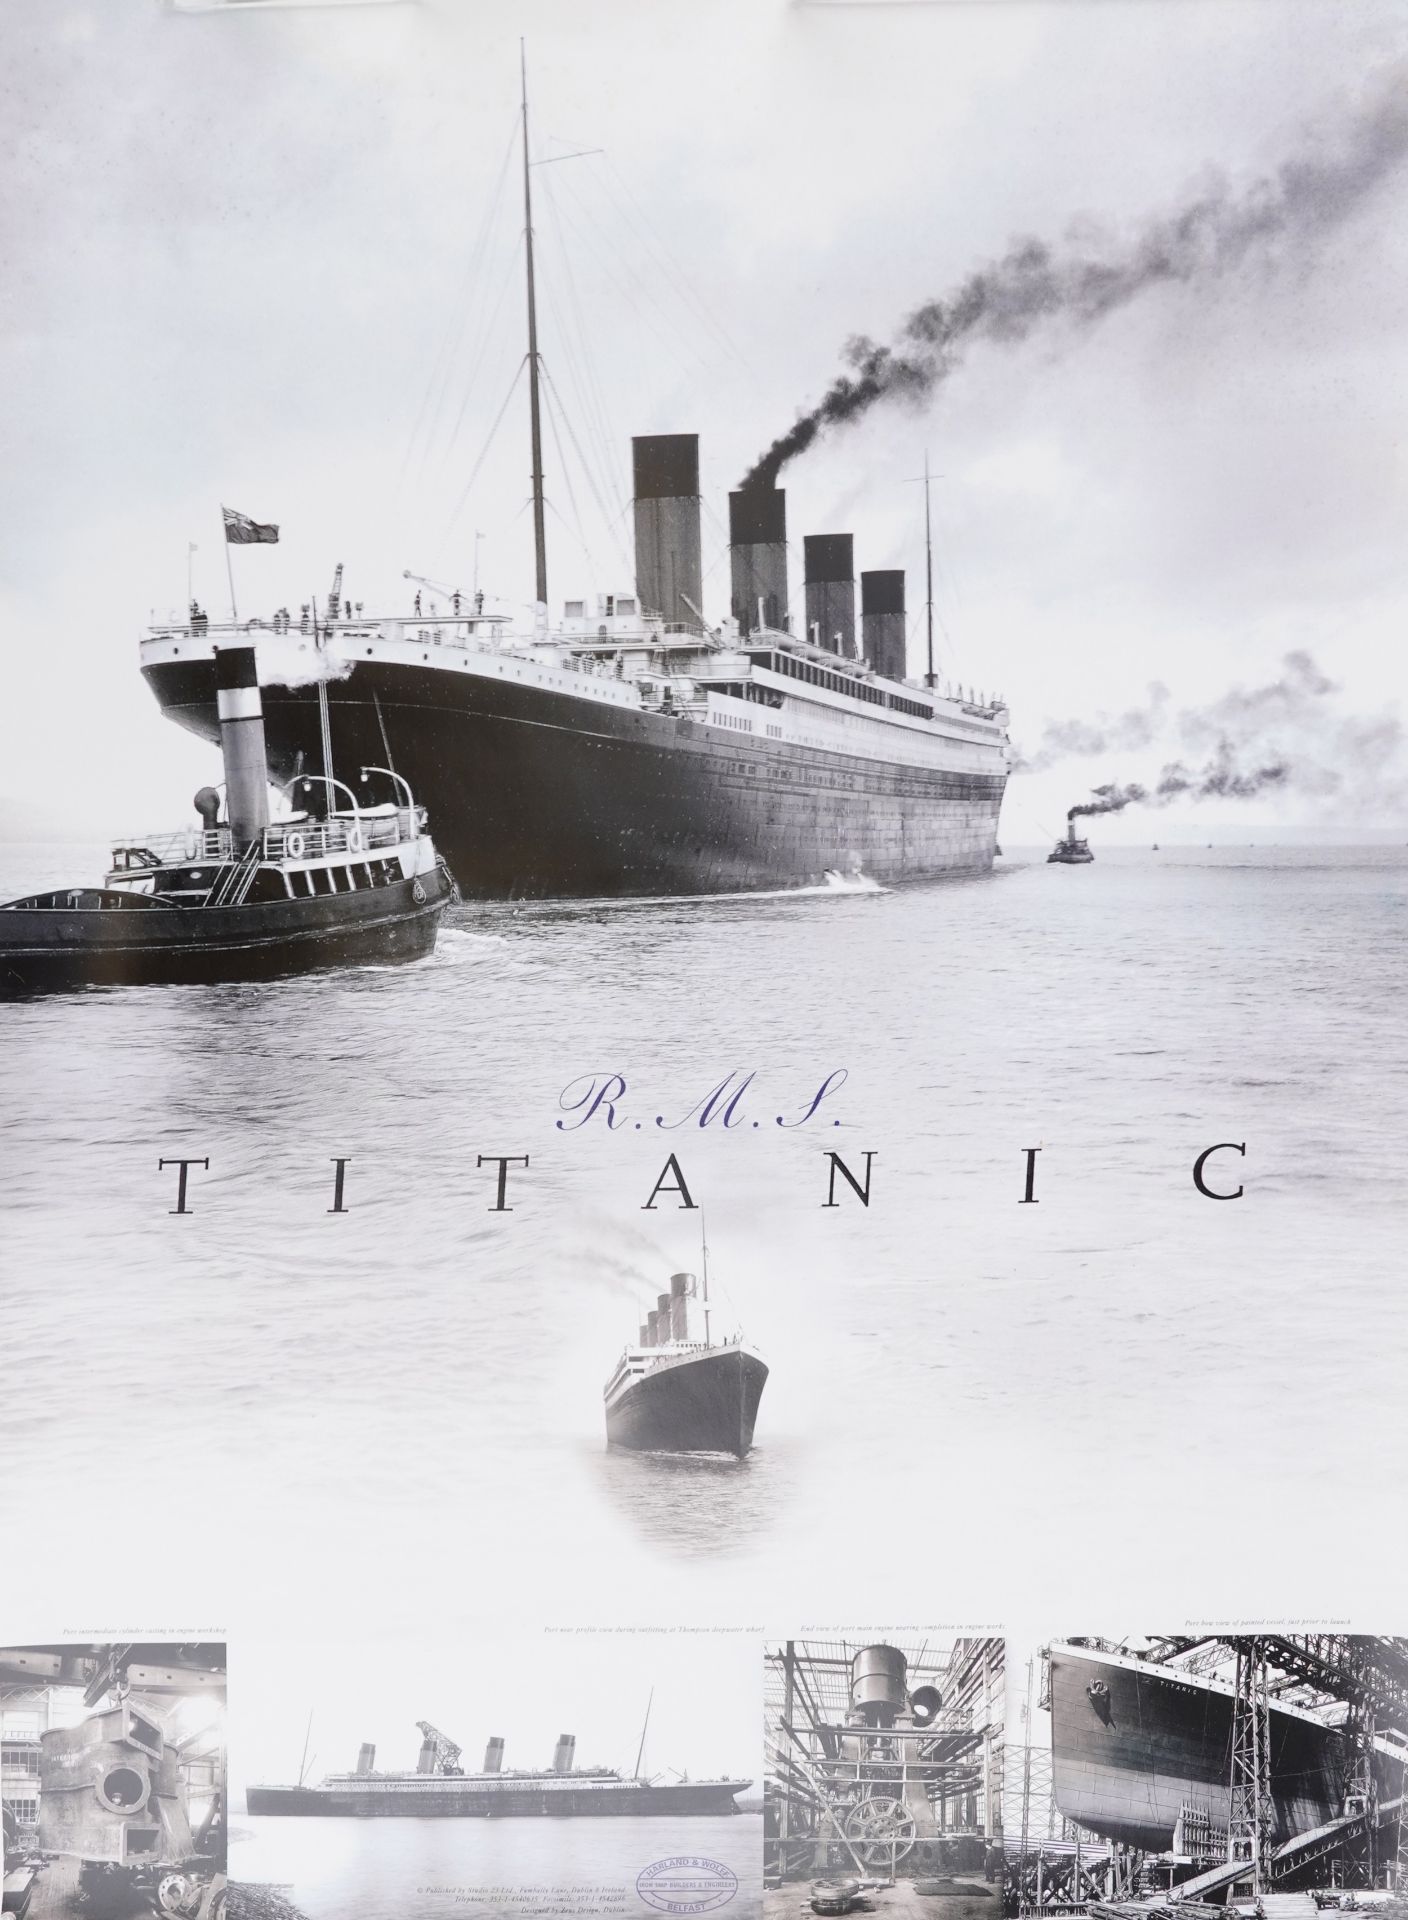 Two shipping interest RMS Titanic posters, the largest 86cm x 63.5cm : For further information on - Image 4 of 5